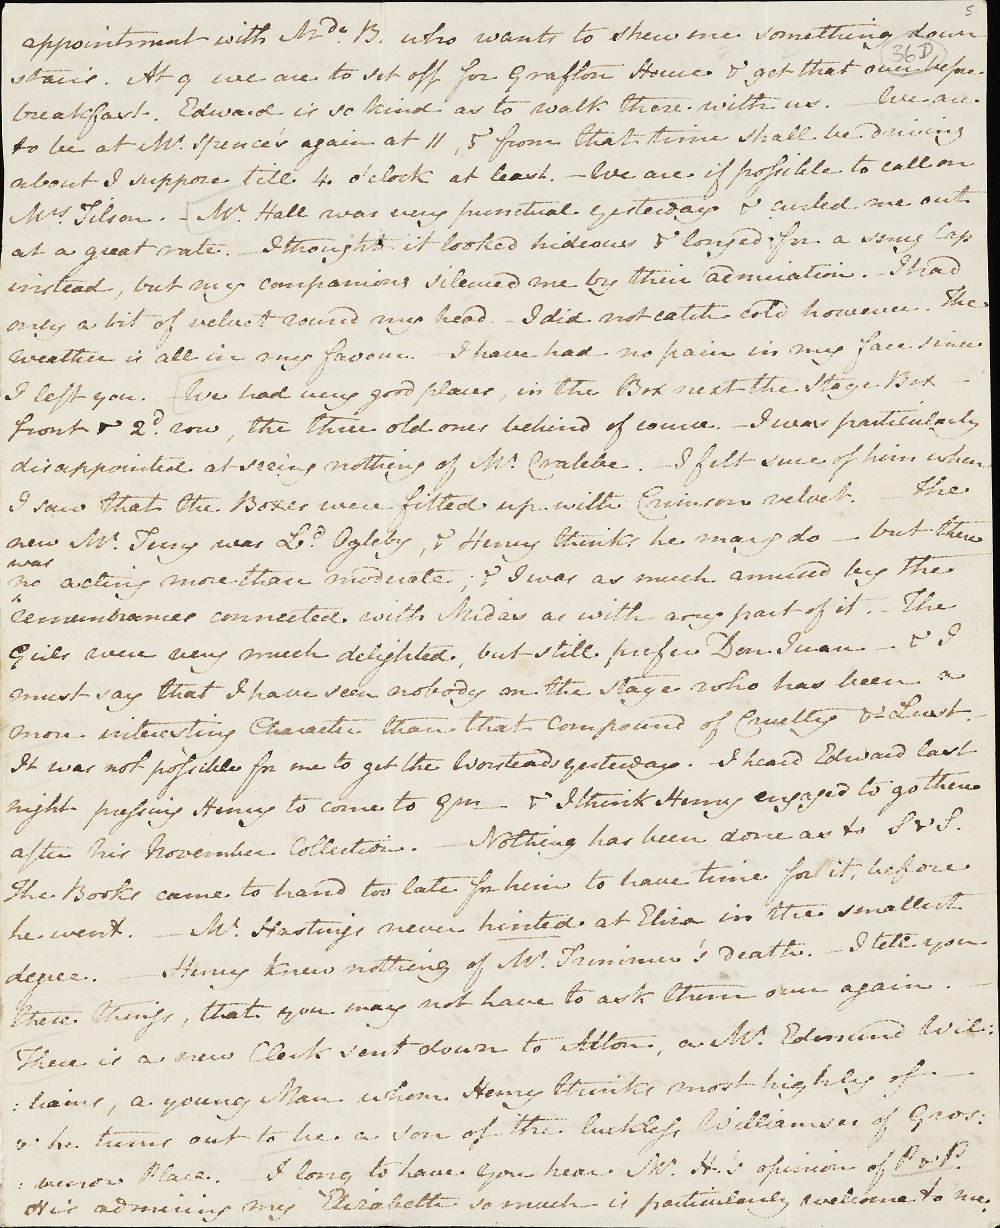 Page 5 of a letter from Jane Austen to Cassandra Austen 15th-16th September 1813